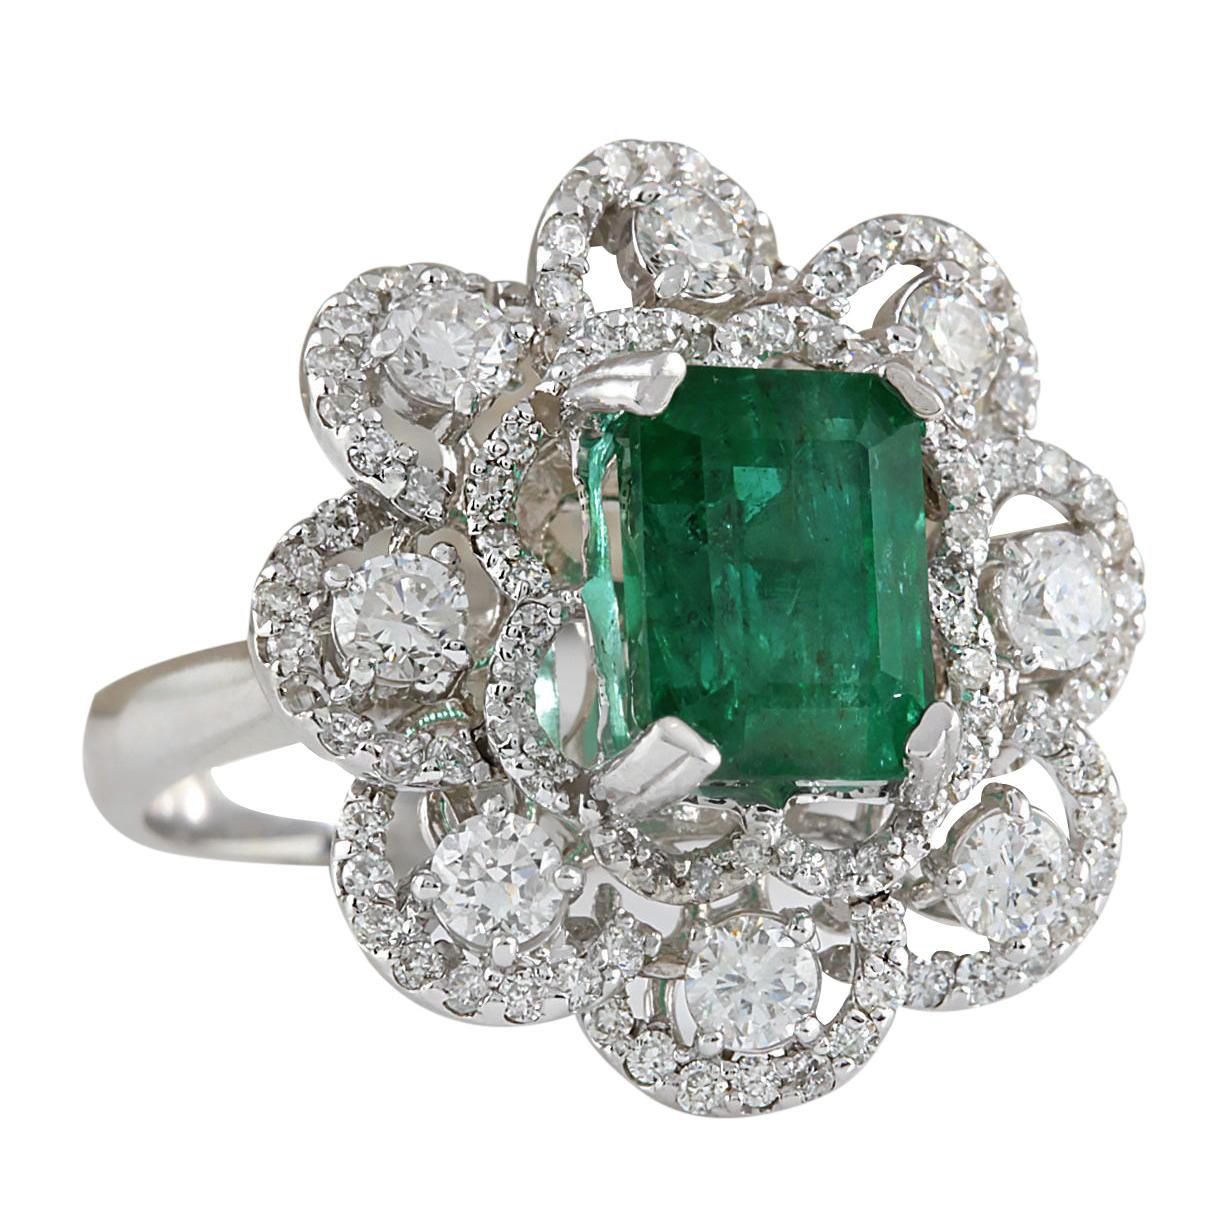 4.70 Carat Emerald 14 Karat White Gold Diamond Ring
Stamped: 14K White Gold
Total Ring Weight: 8.0 Grams
Total  Emerald Weight is 3.44 Carat (Measures: 9.00x7.00 mm)
Color: Green
Total  Diamond Weight is 1.26 Carat
Color: F-G, Clarity: VS2-SI1
Face